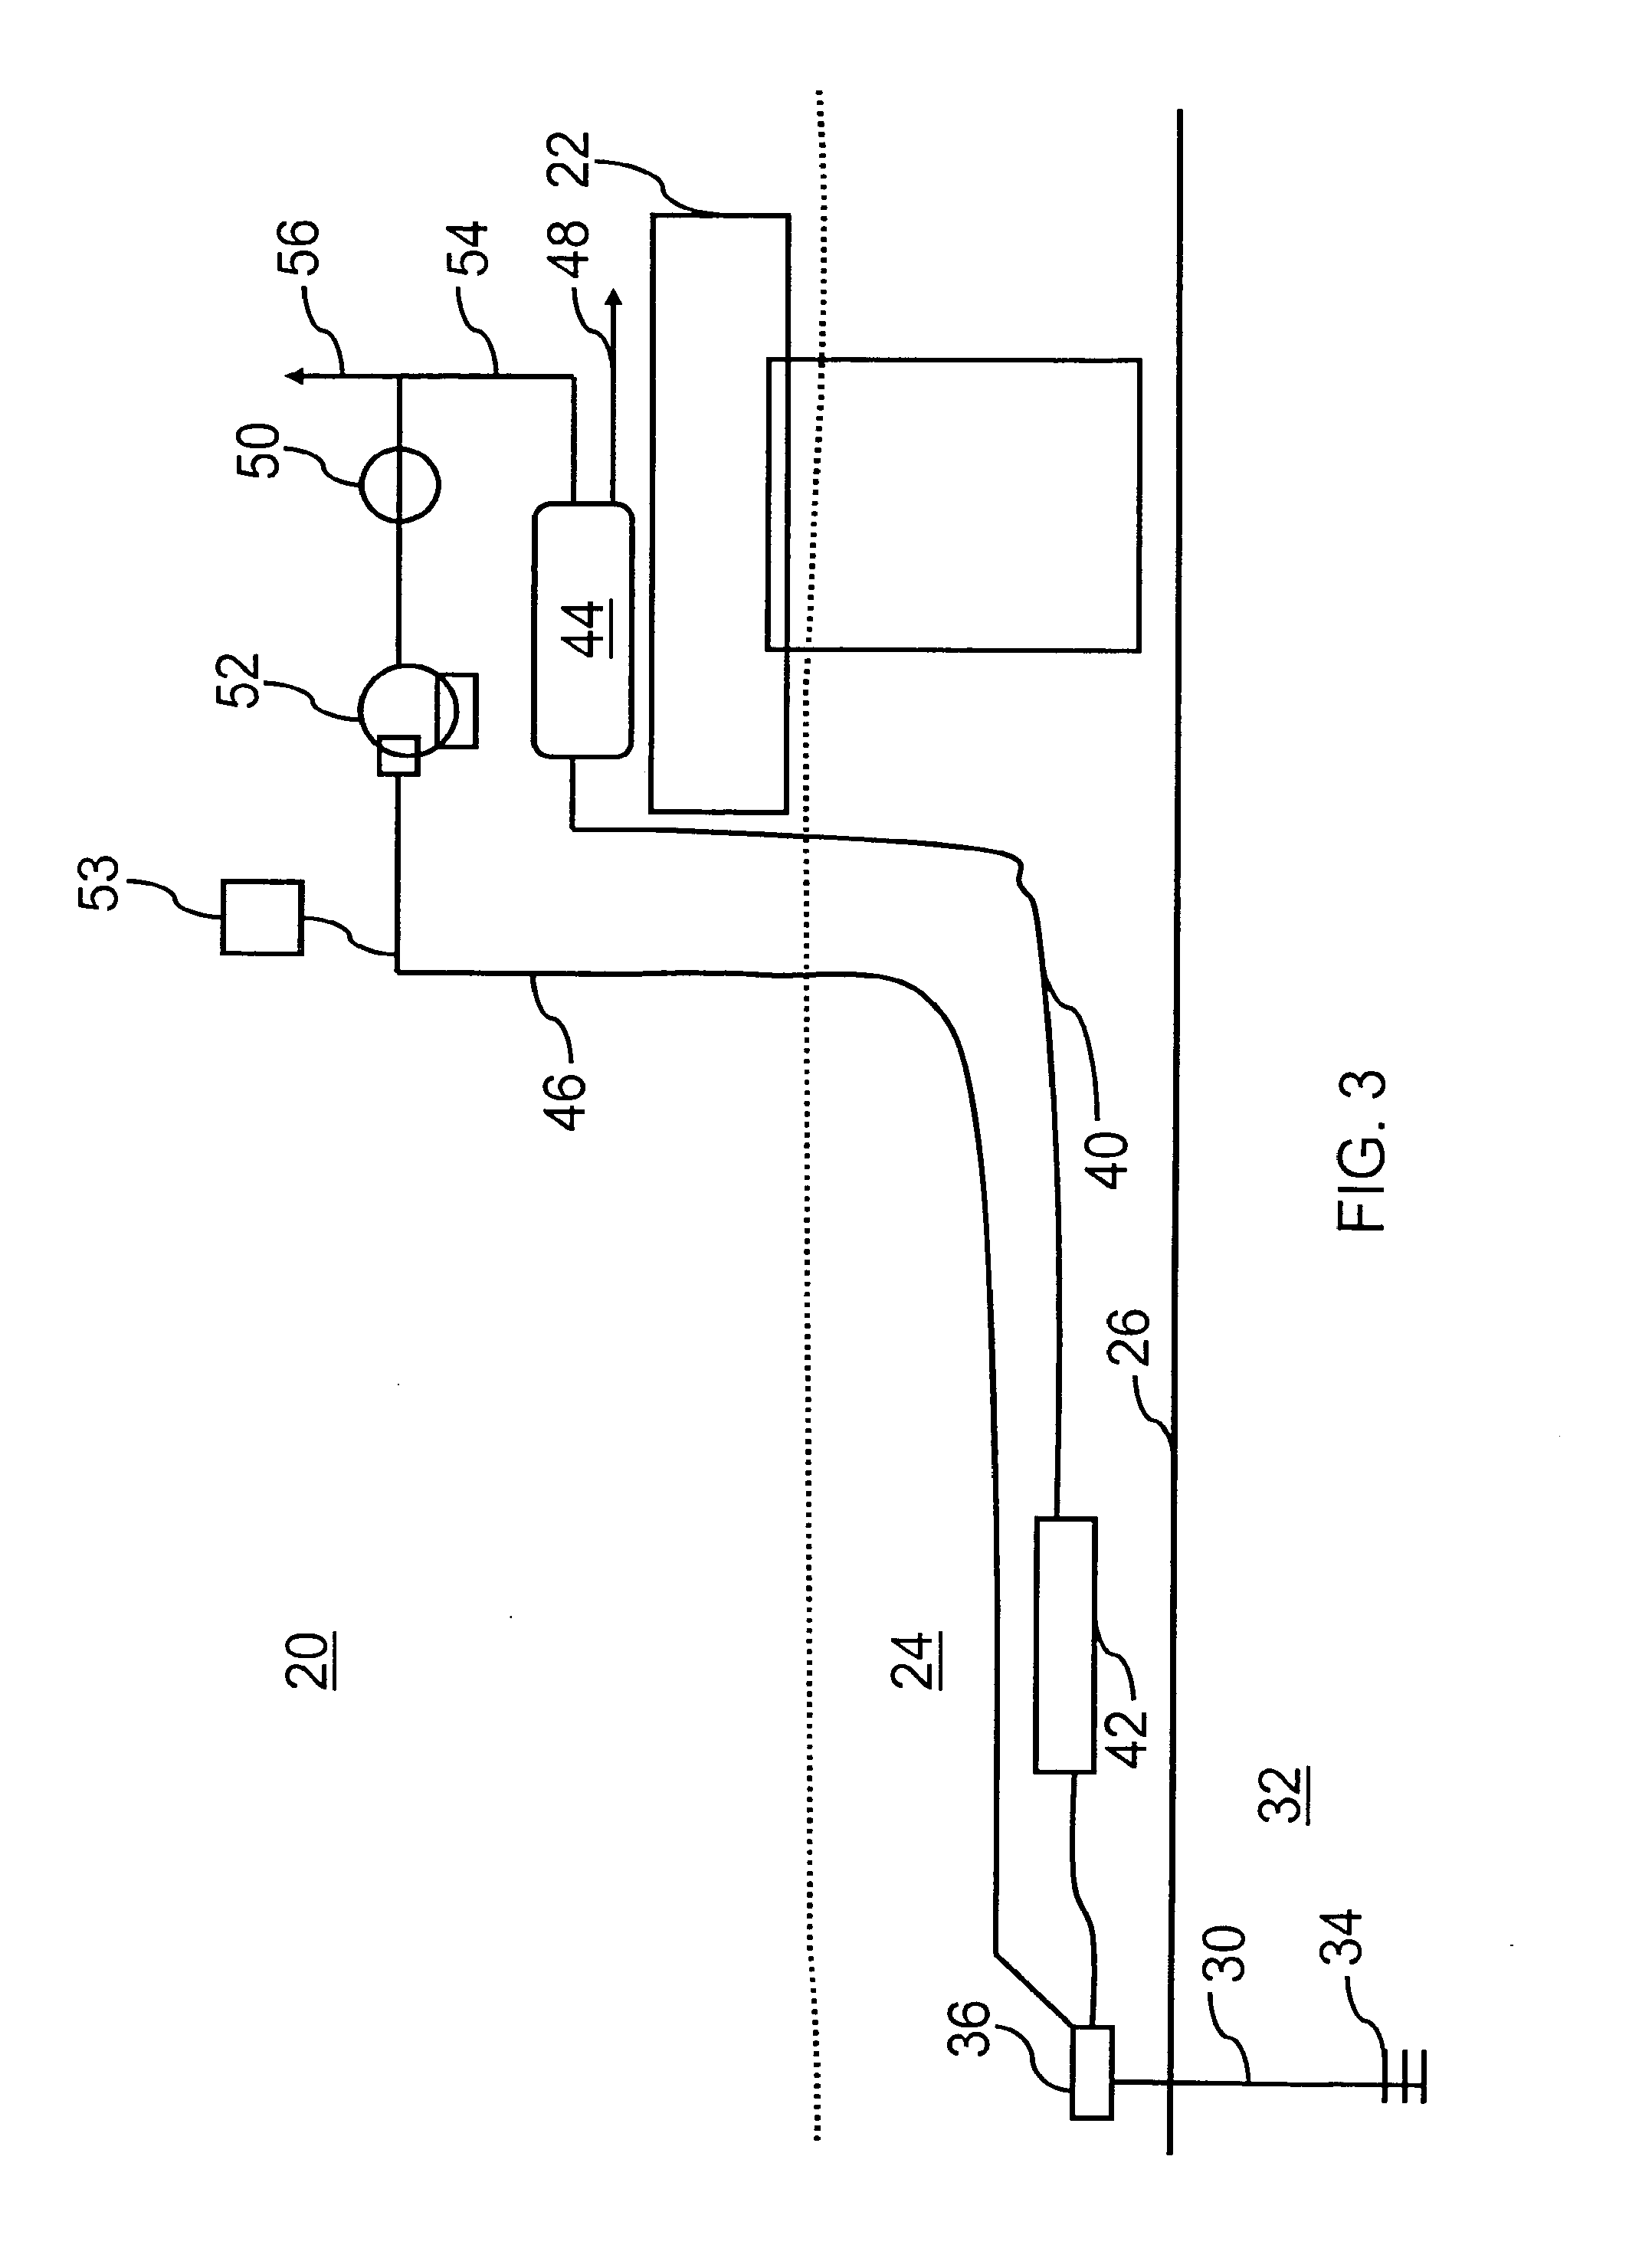 Method and System for Preventing Clathrate Hydrate Blockage Formation in Flow Lines by Enhancing Water Cut